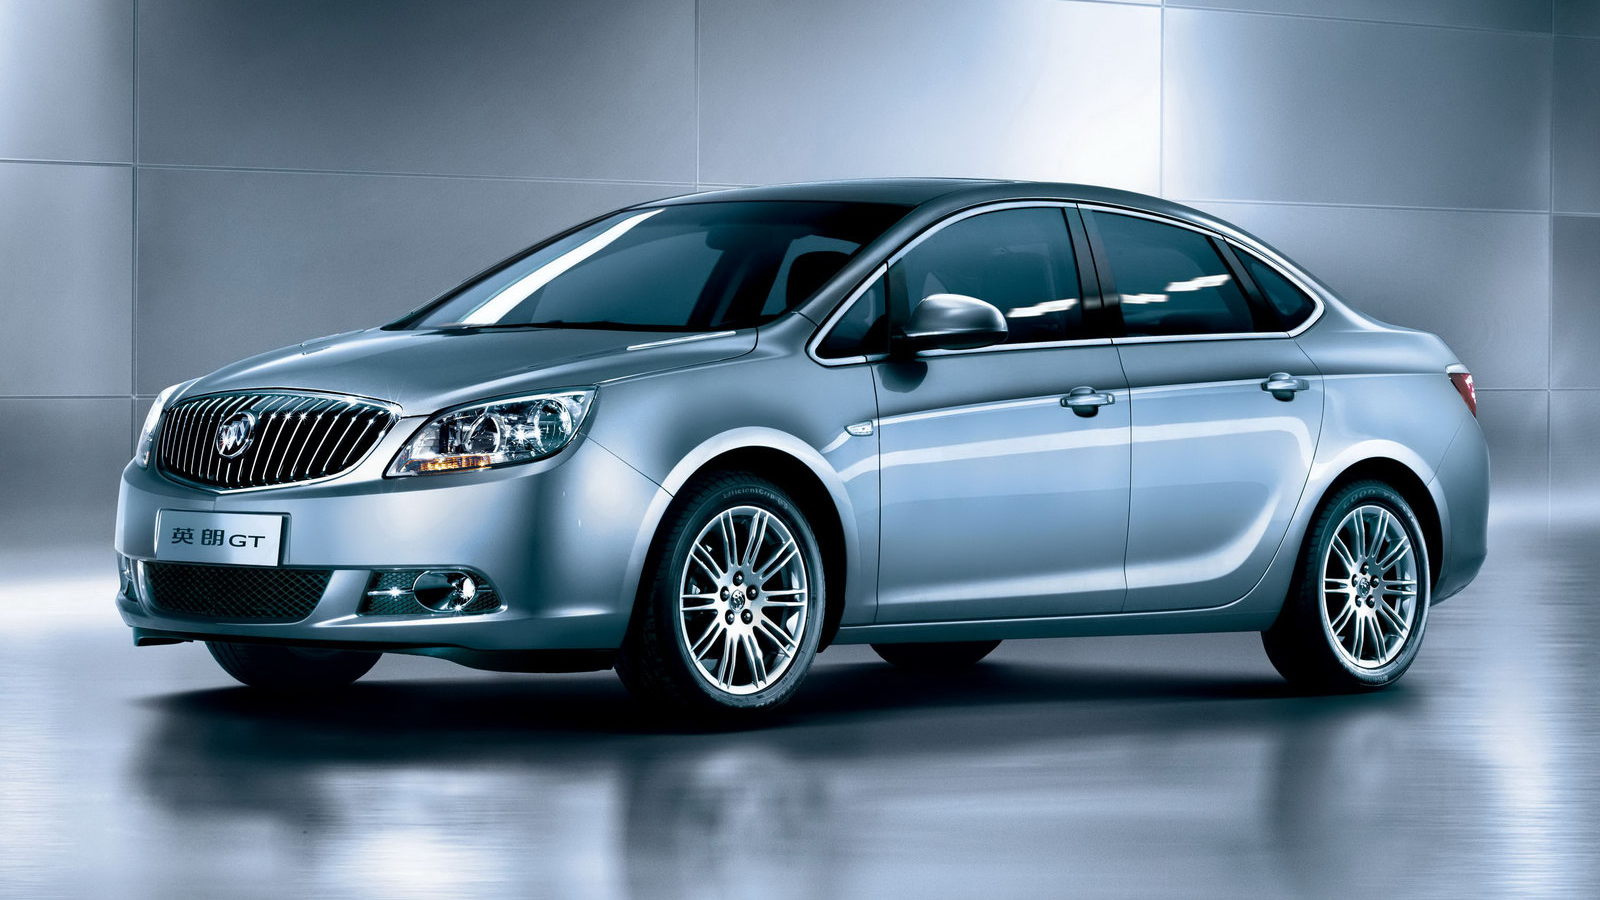 2011 Buick Excelle GT